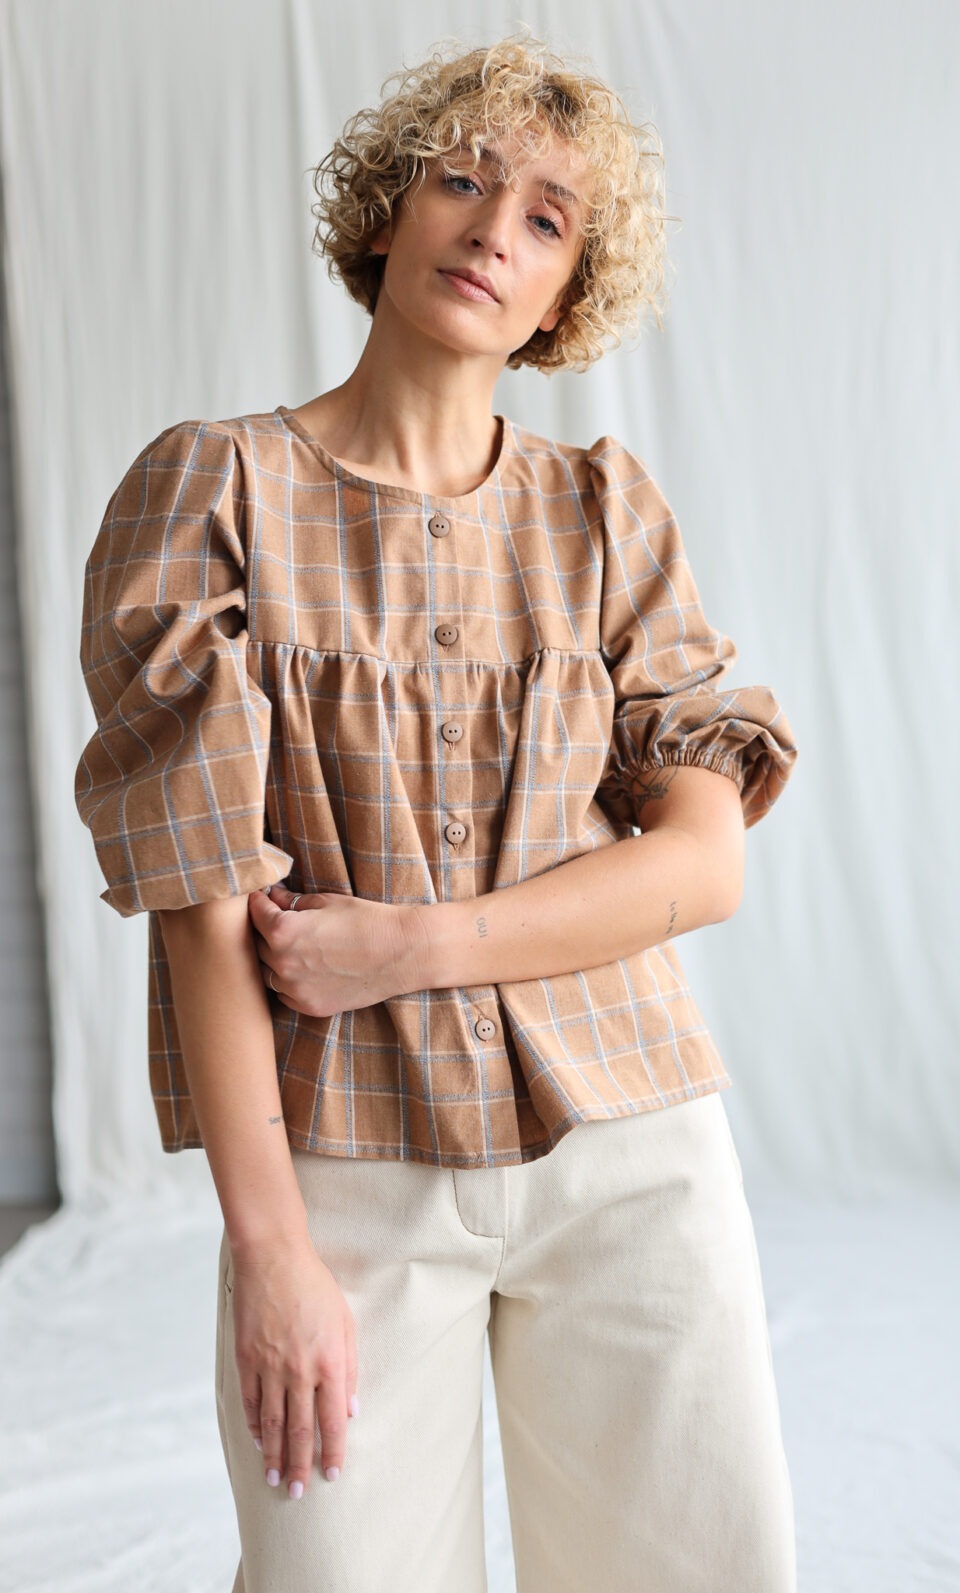 Puff sleeve blouse in plaid brushed cotton | Tops | Sustainable clothing | OffOn clothing